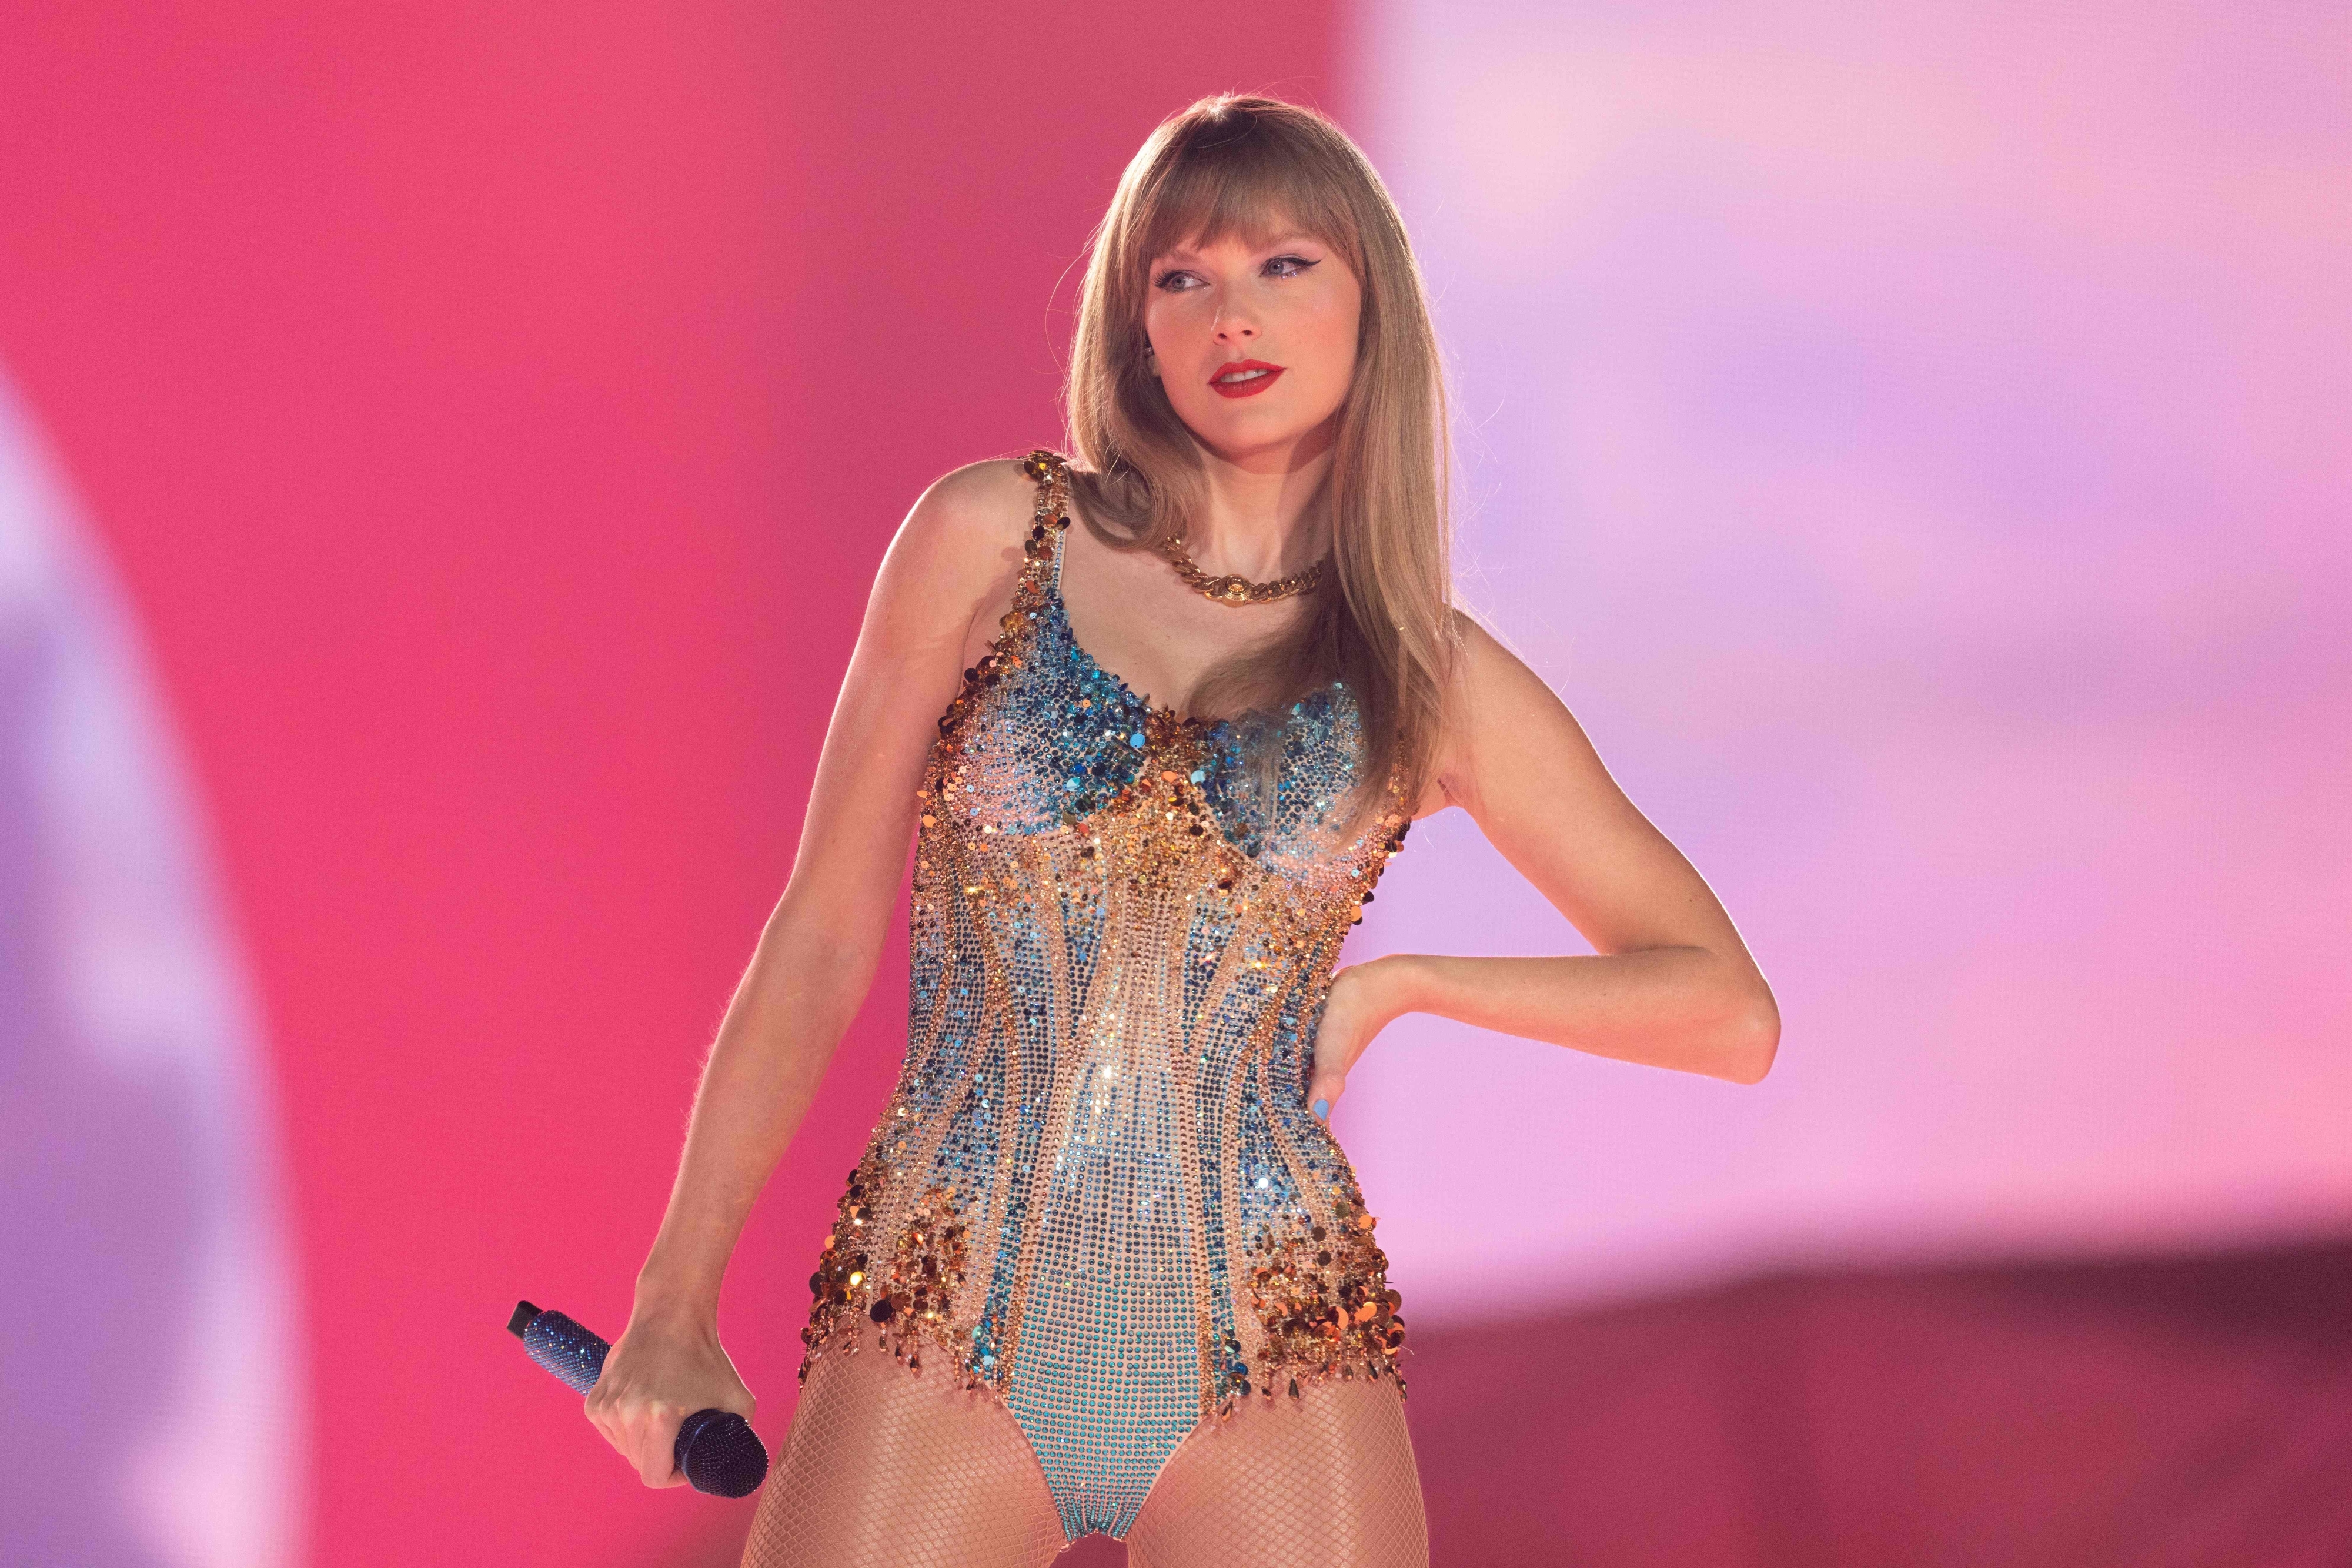 Close-up of Taylor onstage in a spangly bodysuit